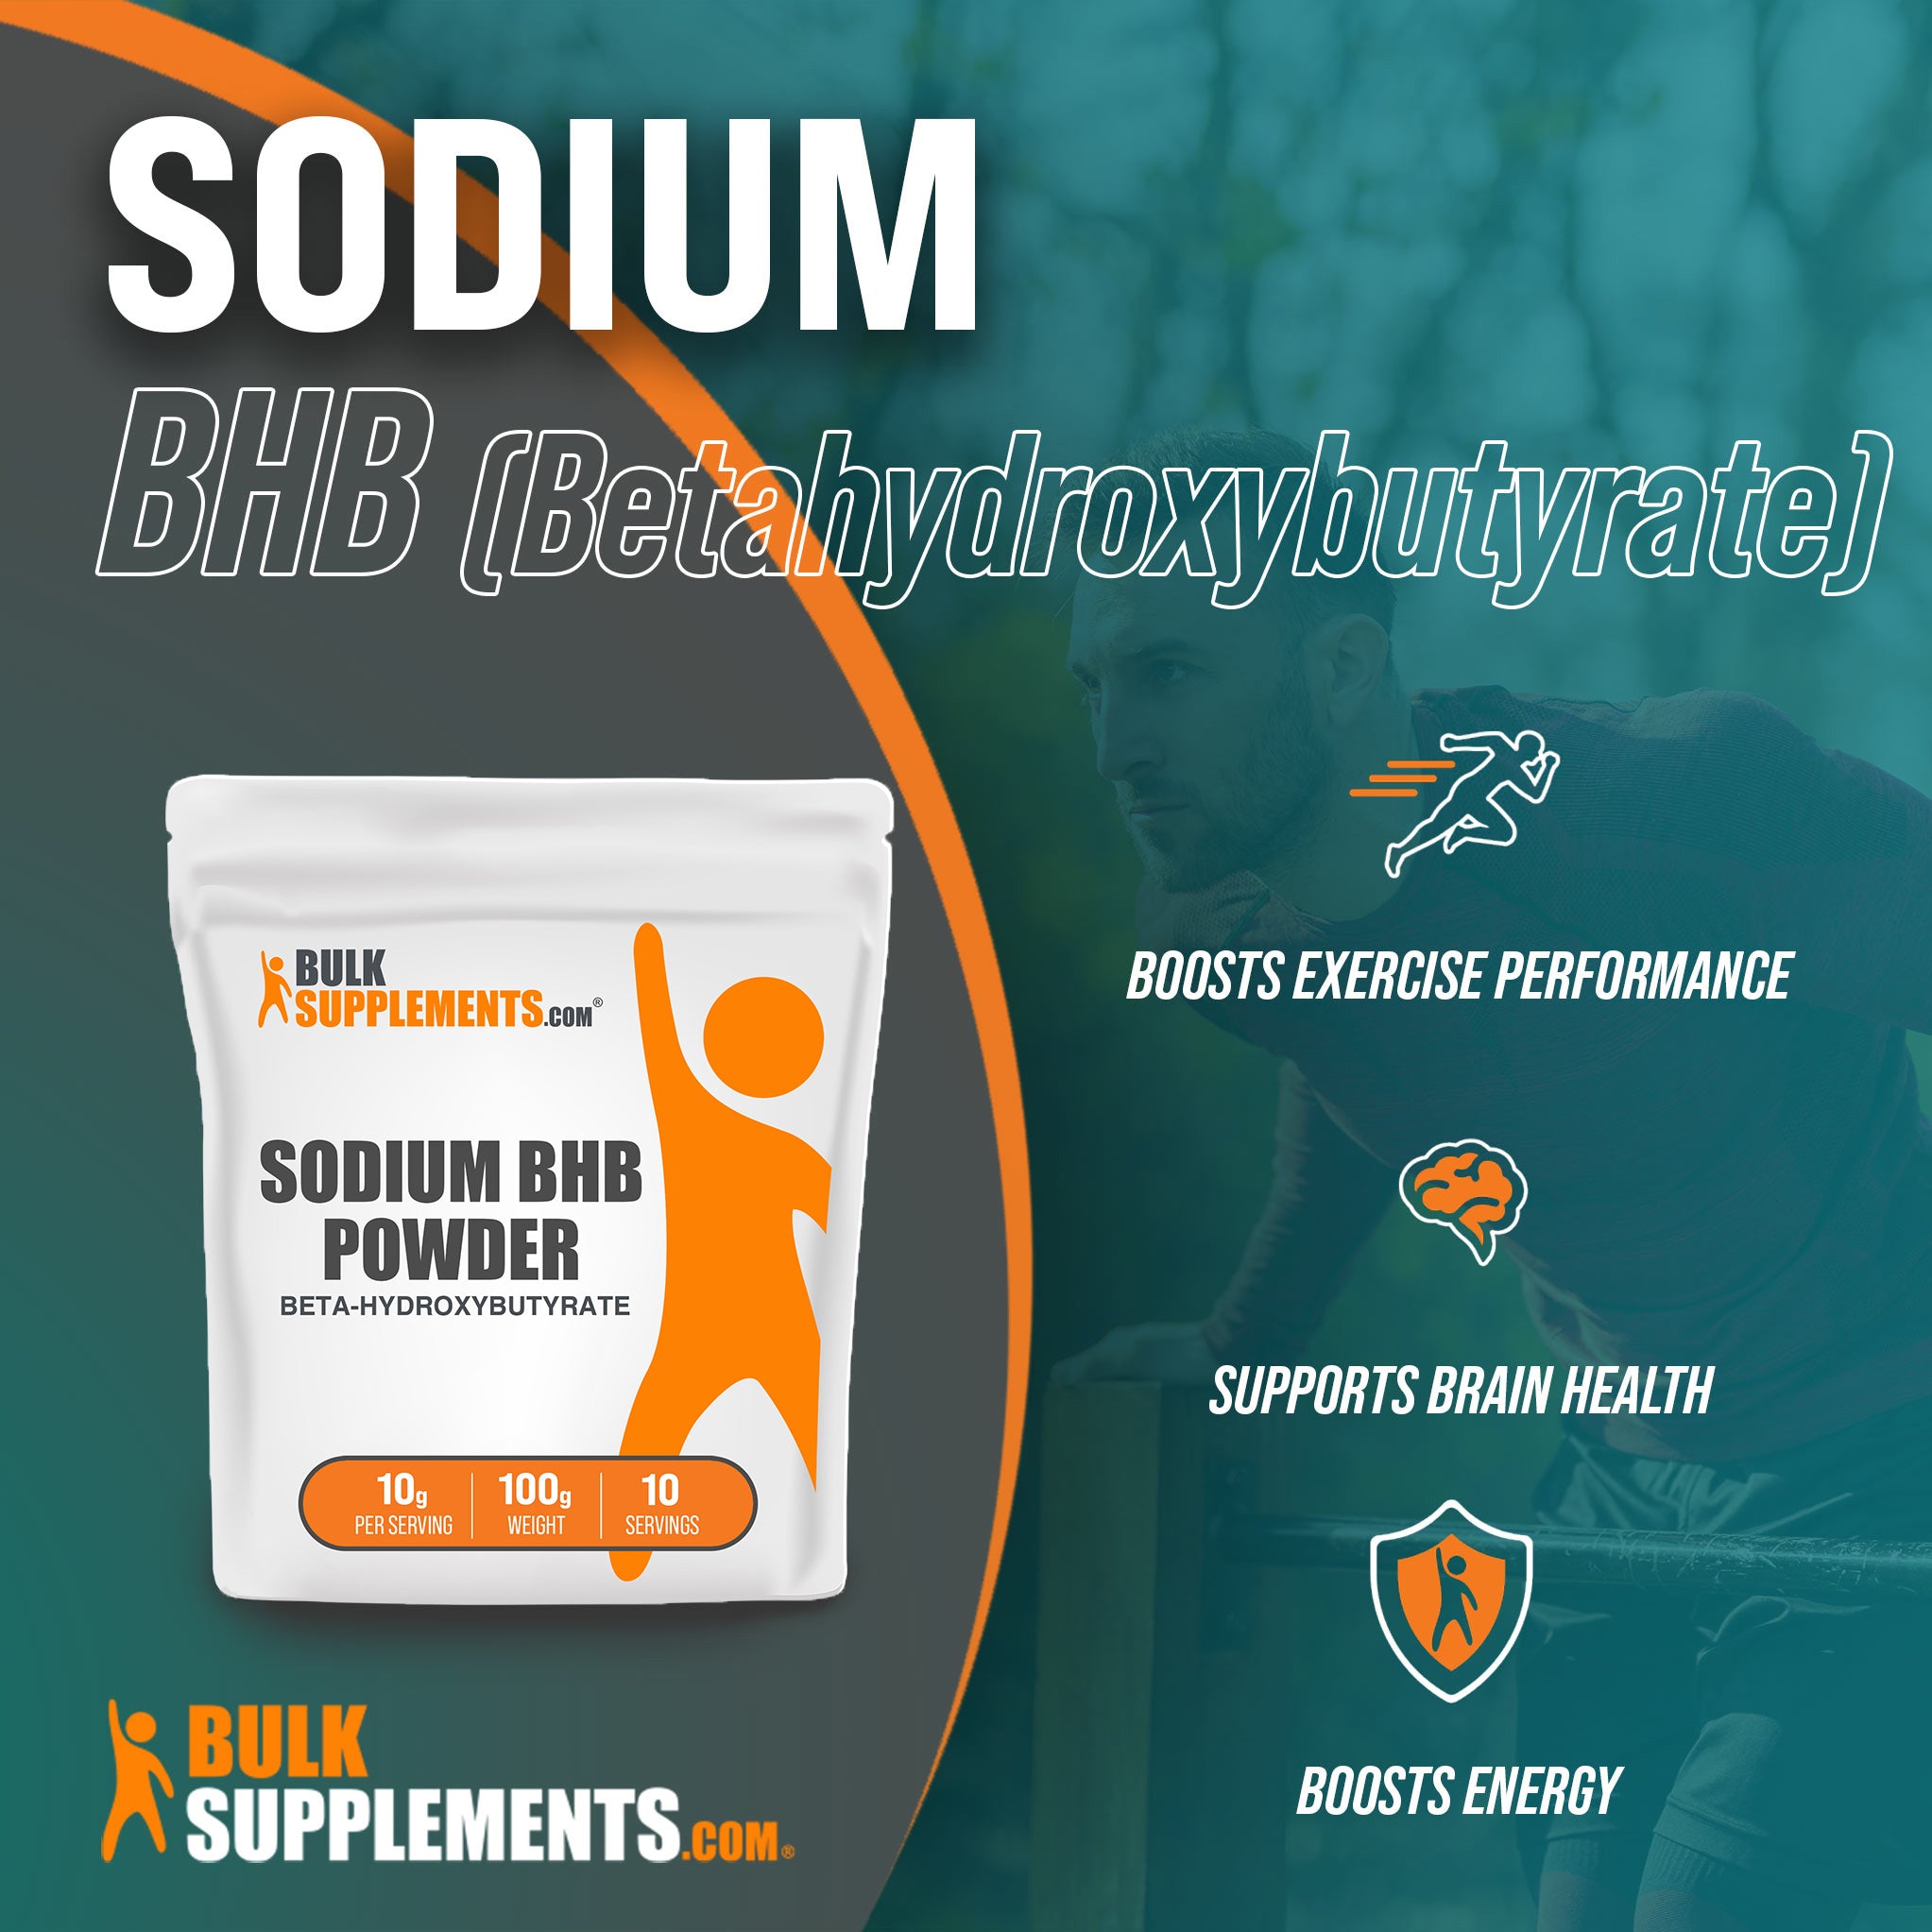 Benefits of Sodium BHB (Beta-hydroxybutyrate): Boosts exercise performance, Supports brain health, Boosts energy